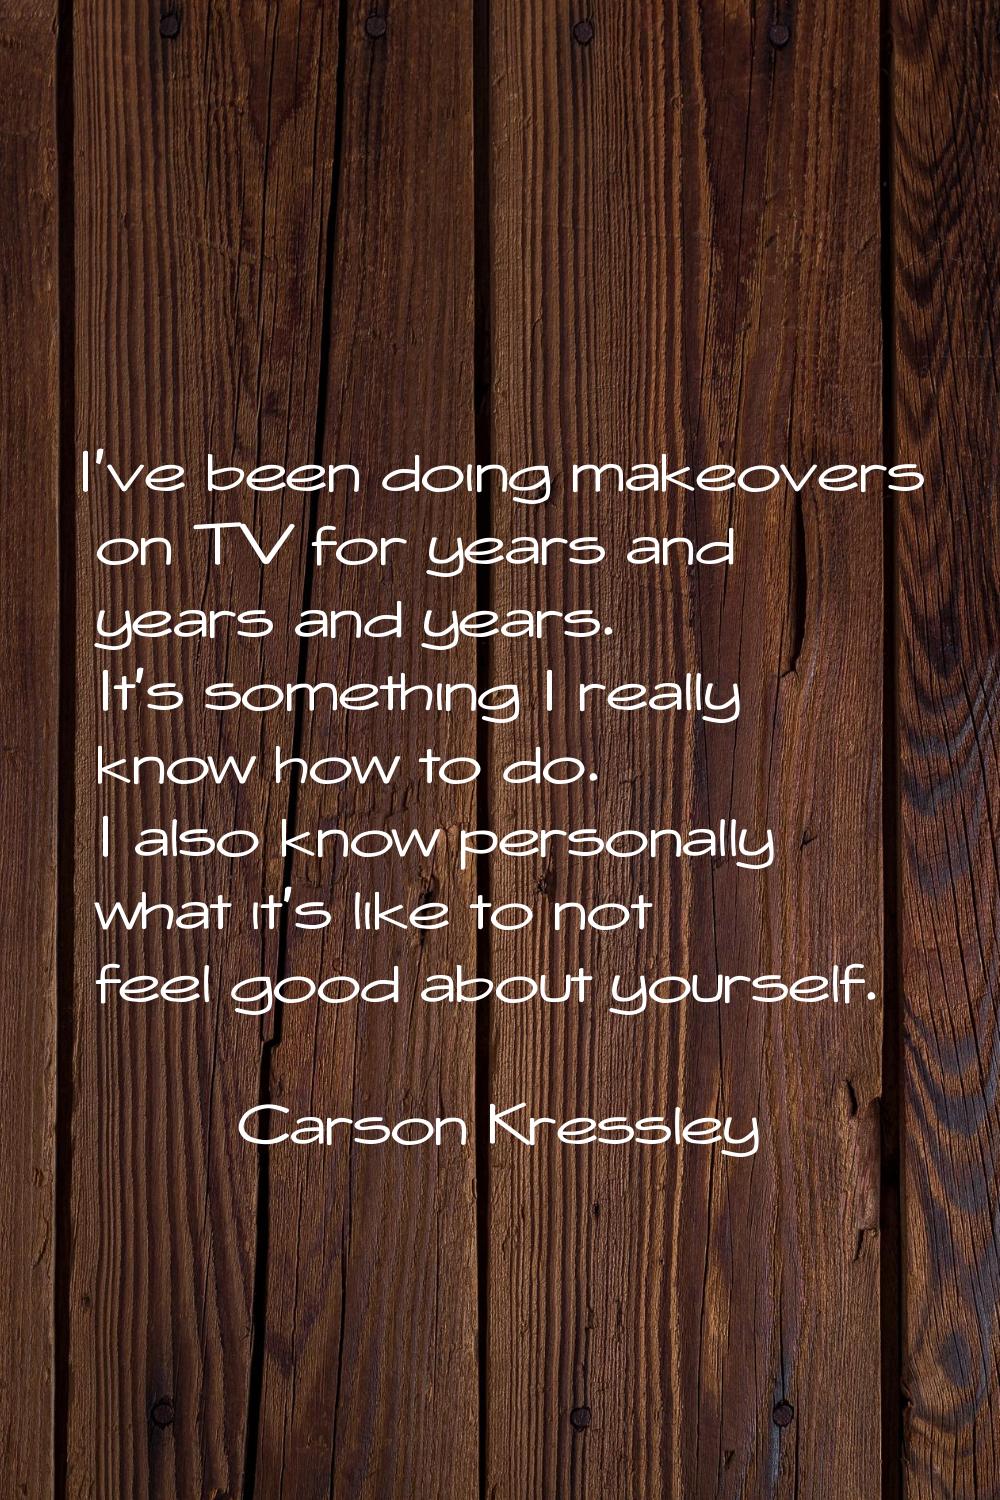 I've been doing makeovers on TV for years and years and years. It's something I really know how to 